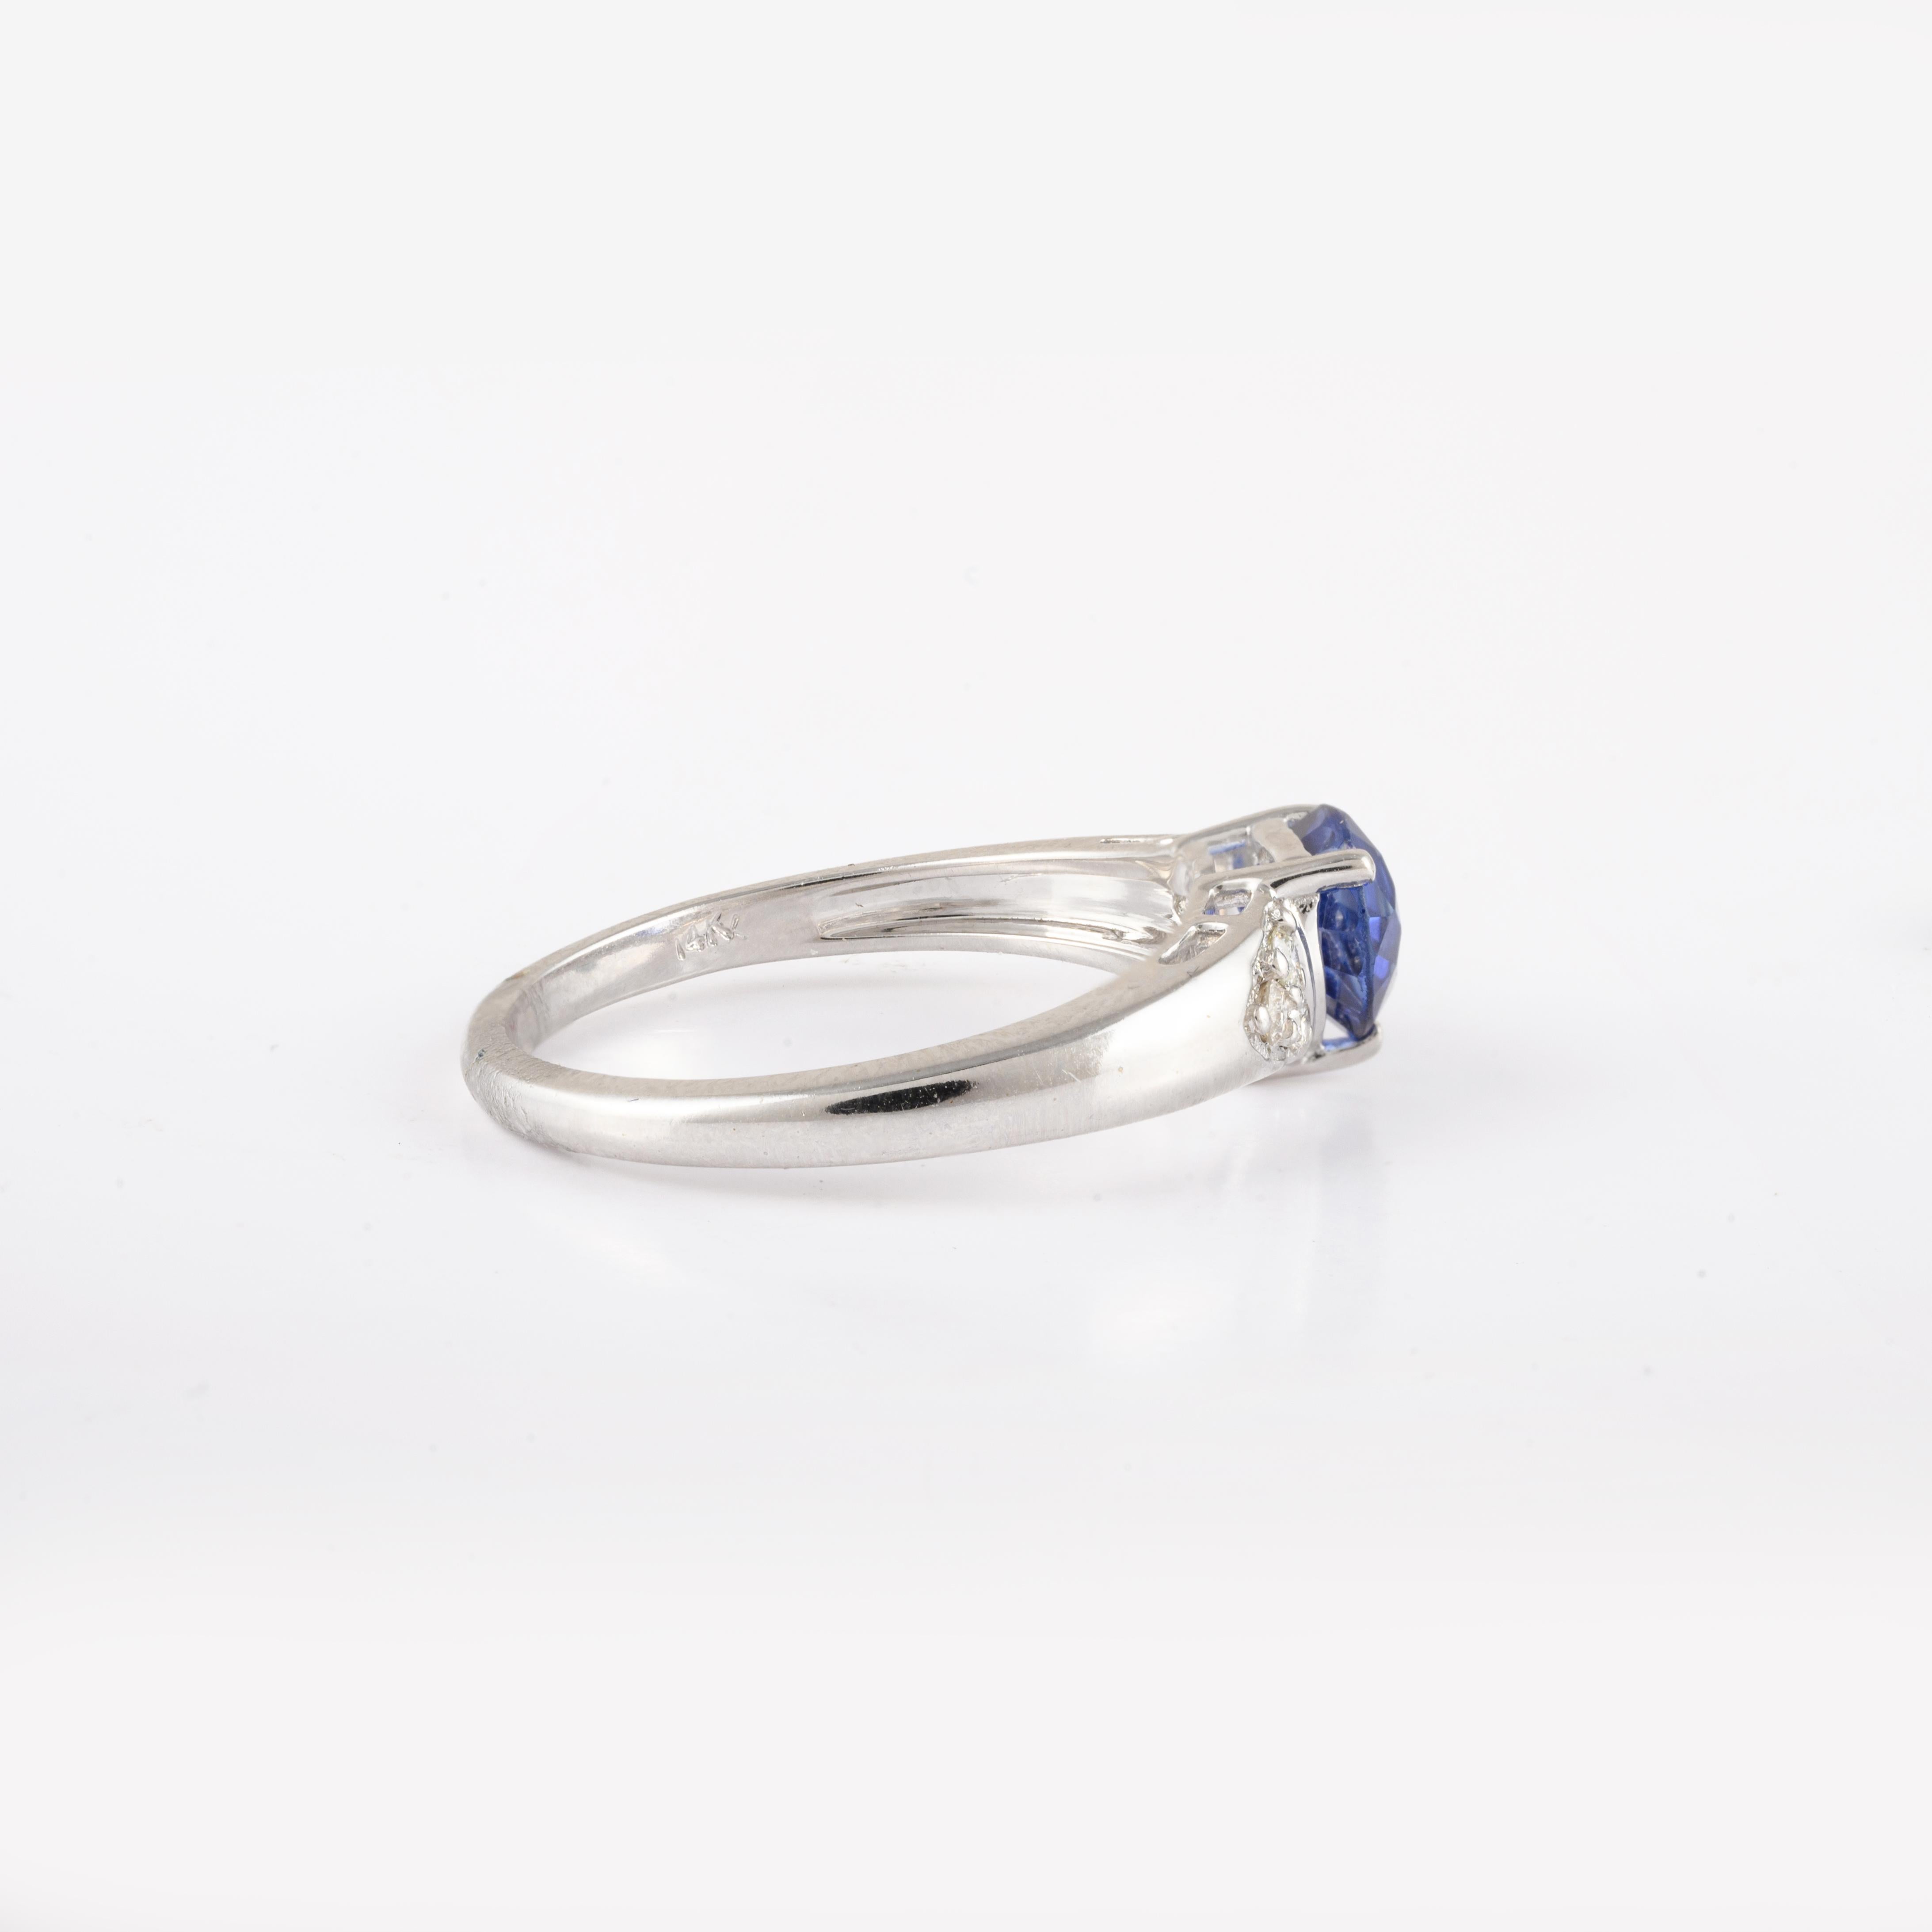 For Sale:  14k White Gold Trillion Cut Sapphire Birthstone Engagement Ring with Diamonds 4